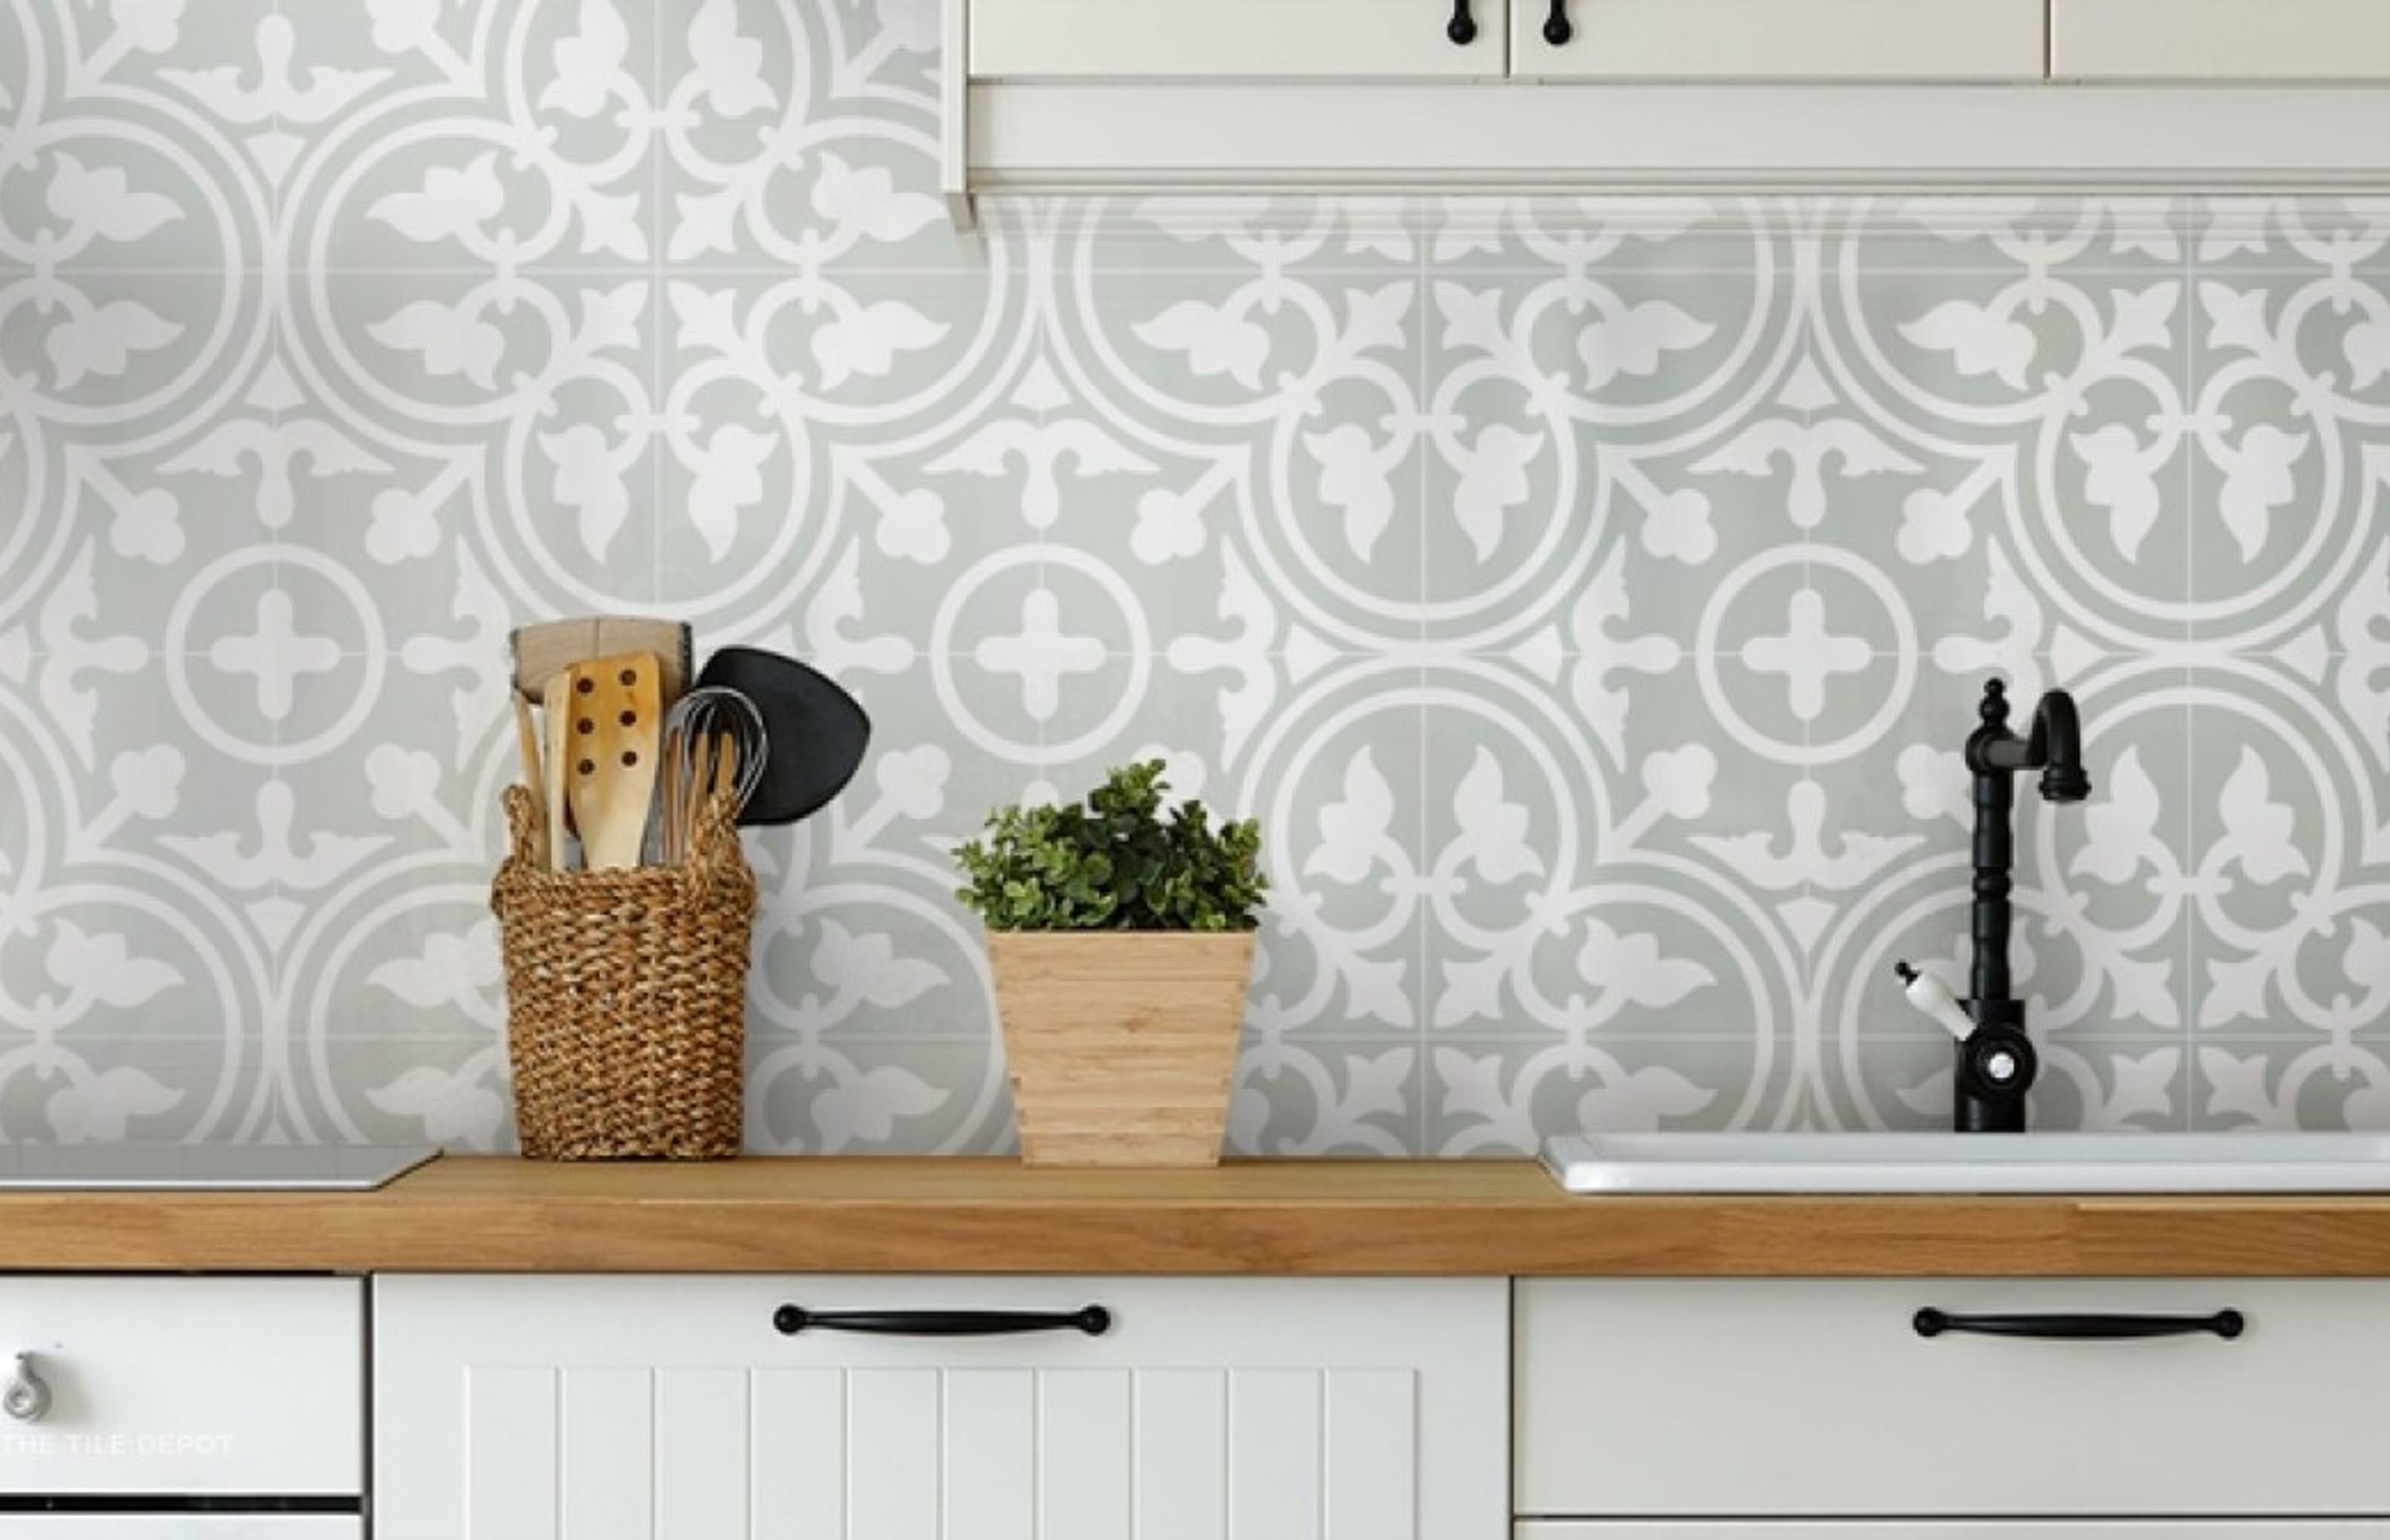 Artisan patterned tiles from Tile depot were used as a splashback. The neutral and light colours used are versatile and can be used for most kitchen designs. The patterns on the tile give the kitchen an artistic look and elevates the overall design of the